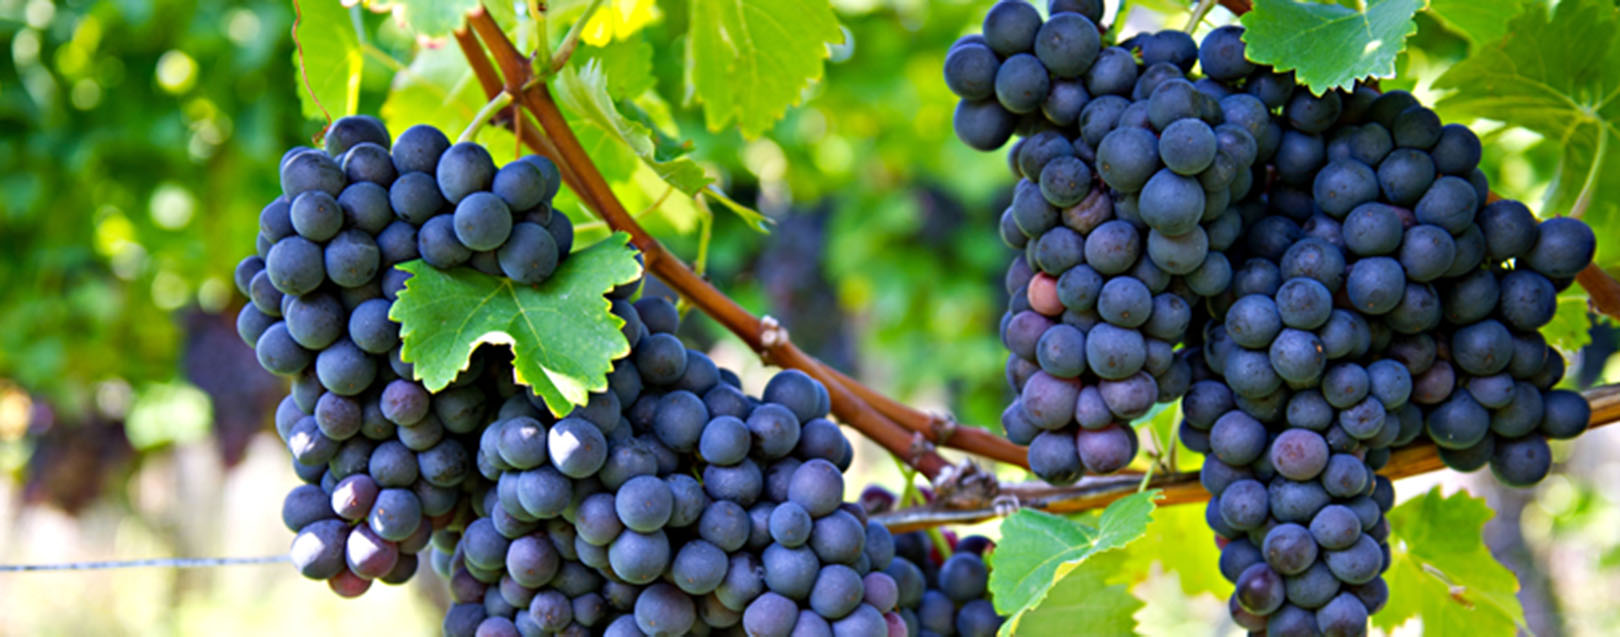 India’s export value of grapes to EU registers 23% growth in three years